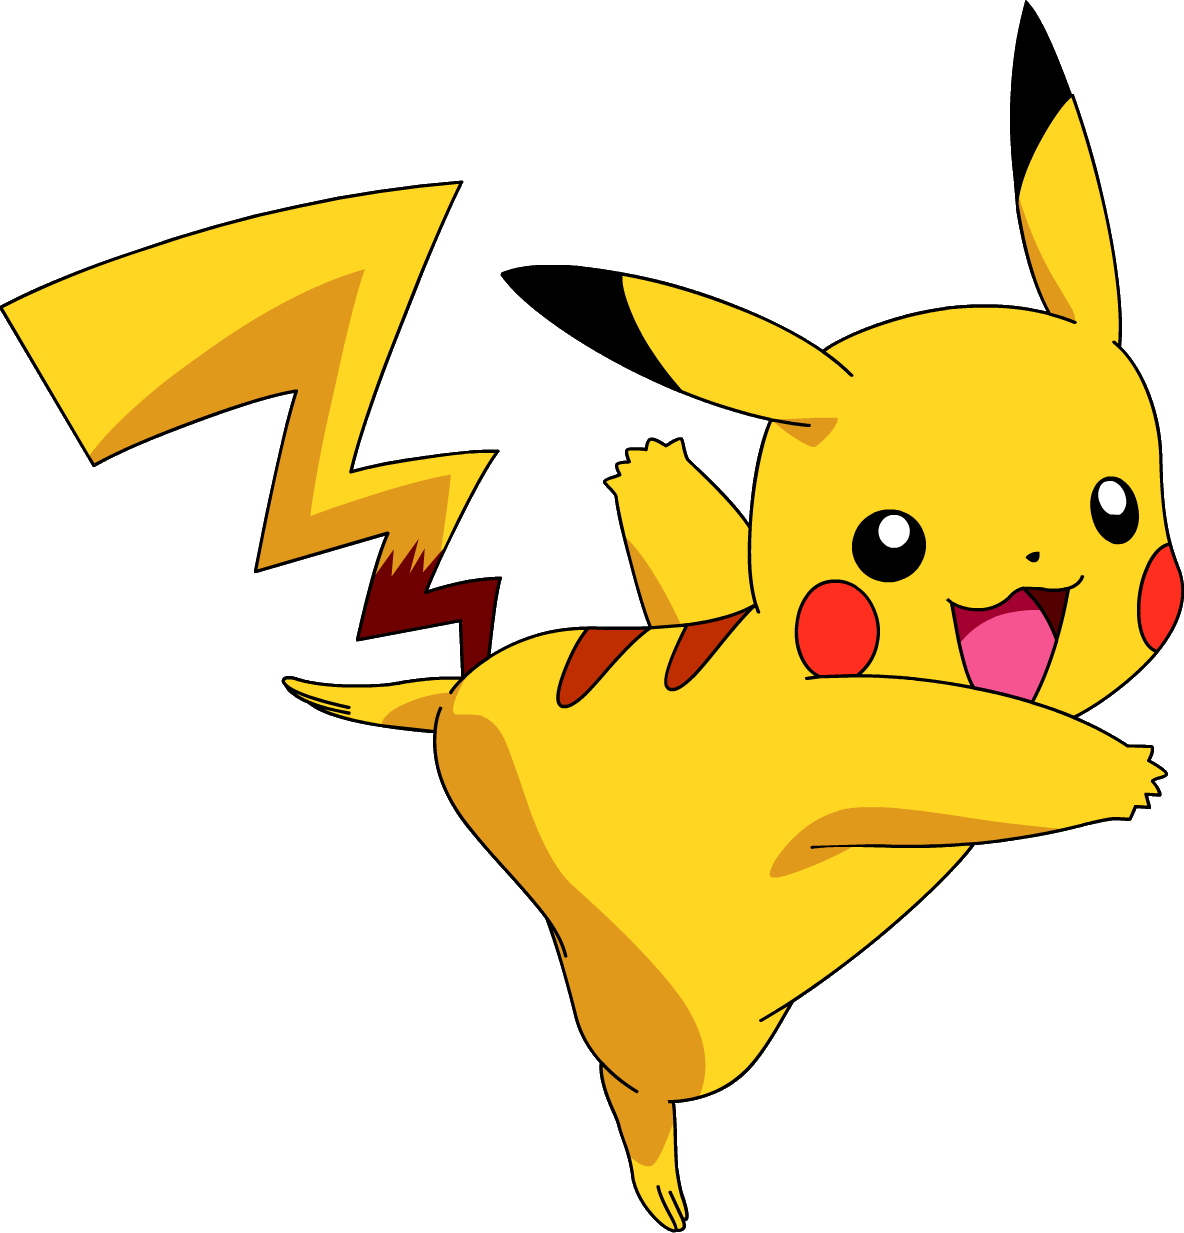 Pikachu Clipart Roblox Pikachu Roblox Transparent Free For Download On Webstockreview 2020 - pikachu clipart roblox high res image pokemon png download 666575 pinclipart